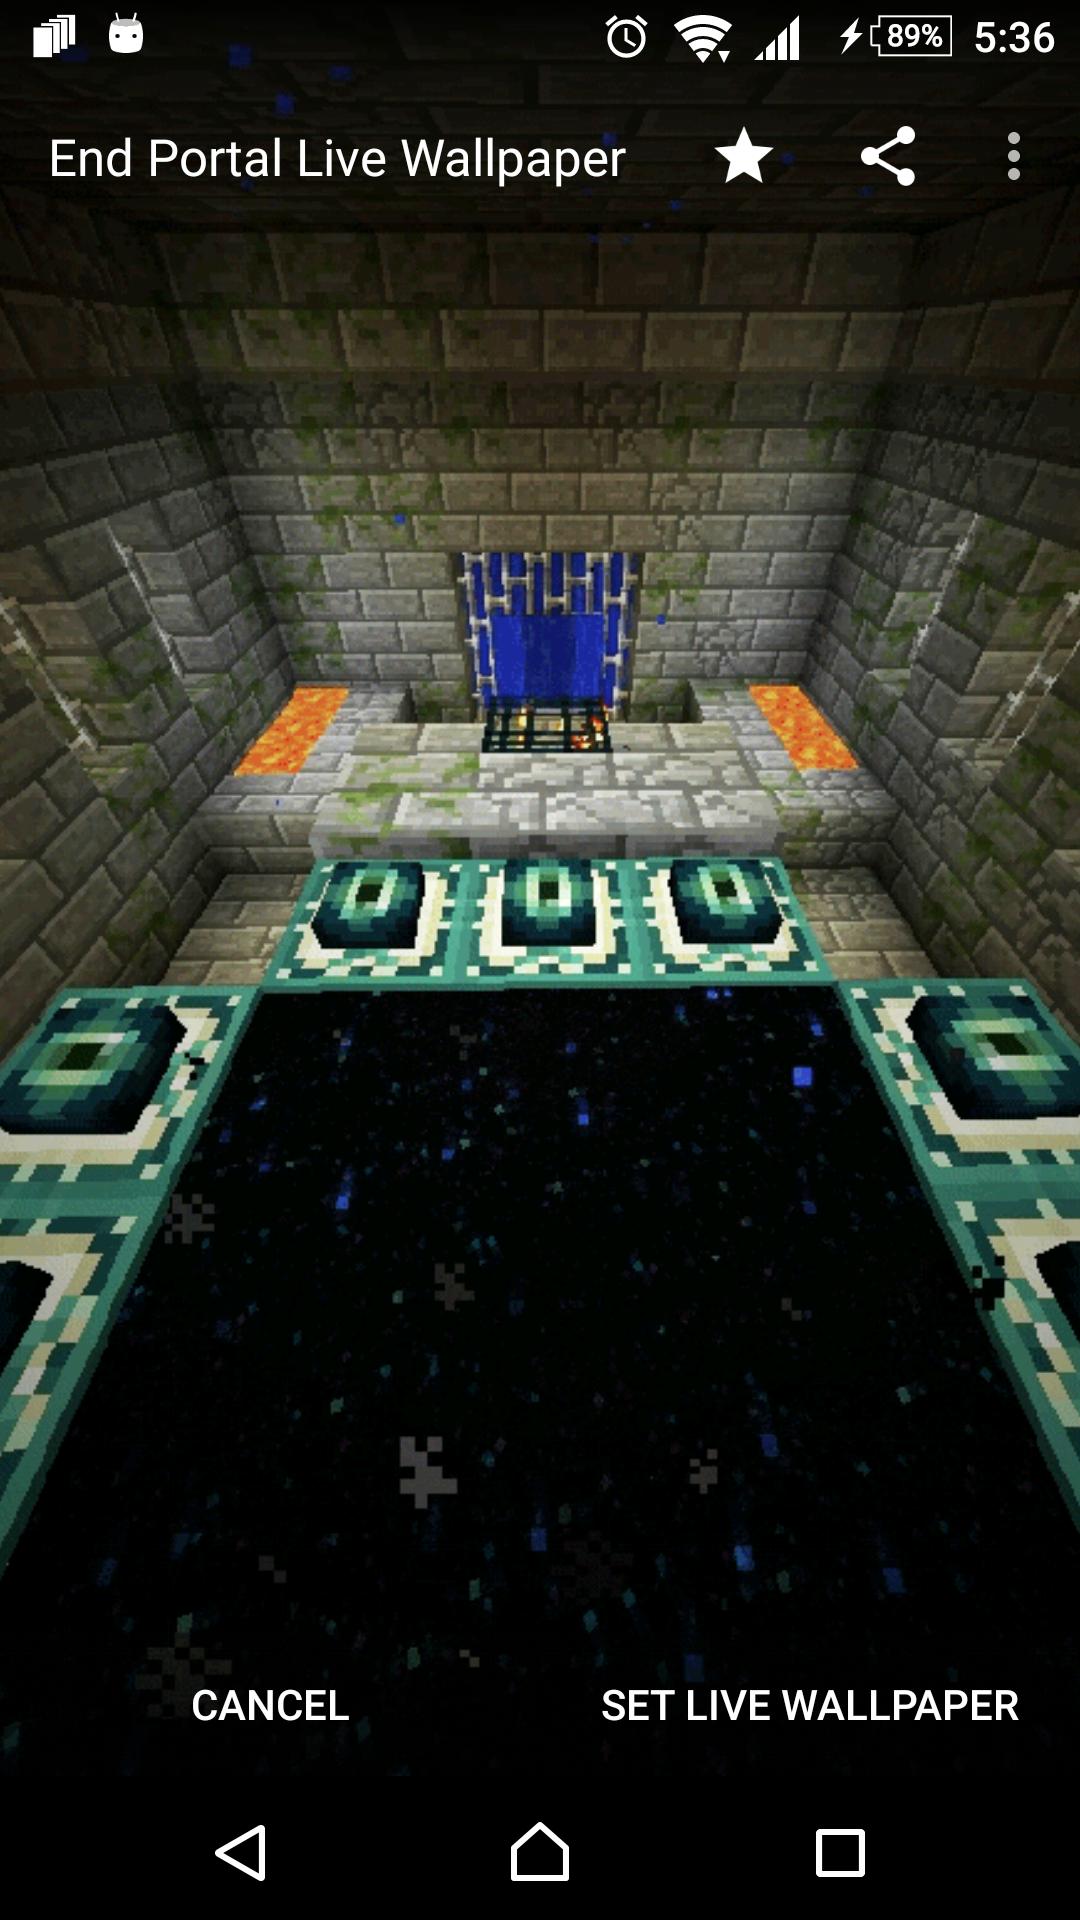 End Portal Live Minecraft Wallpaper For Android Apk Download